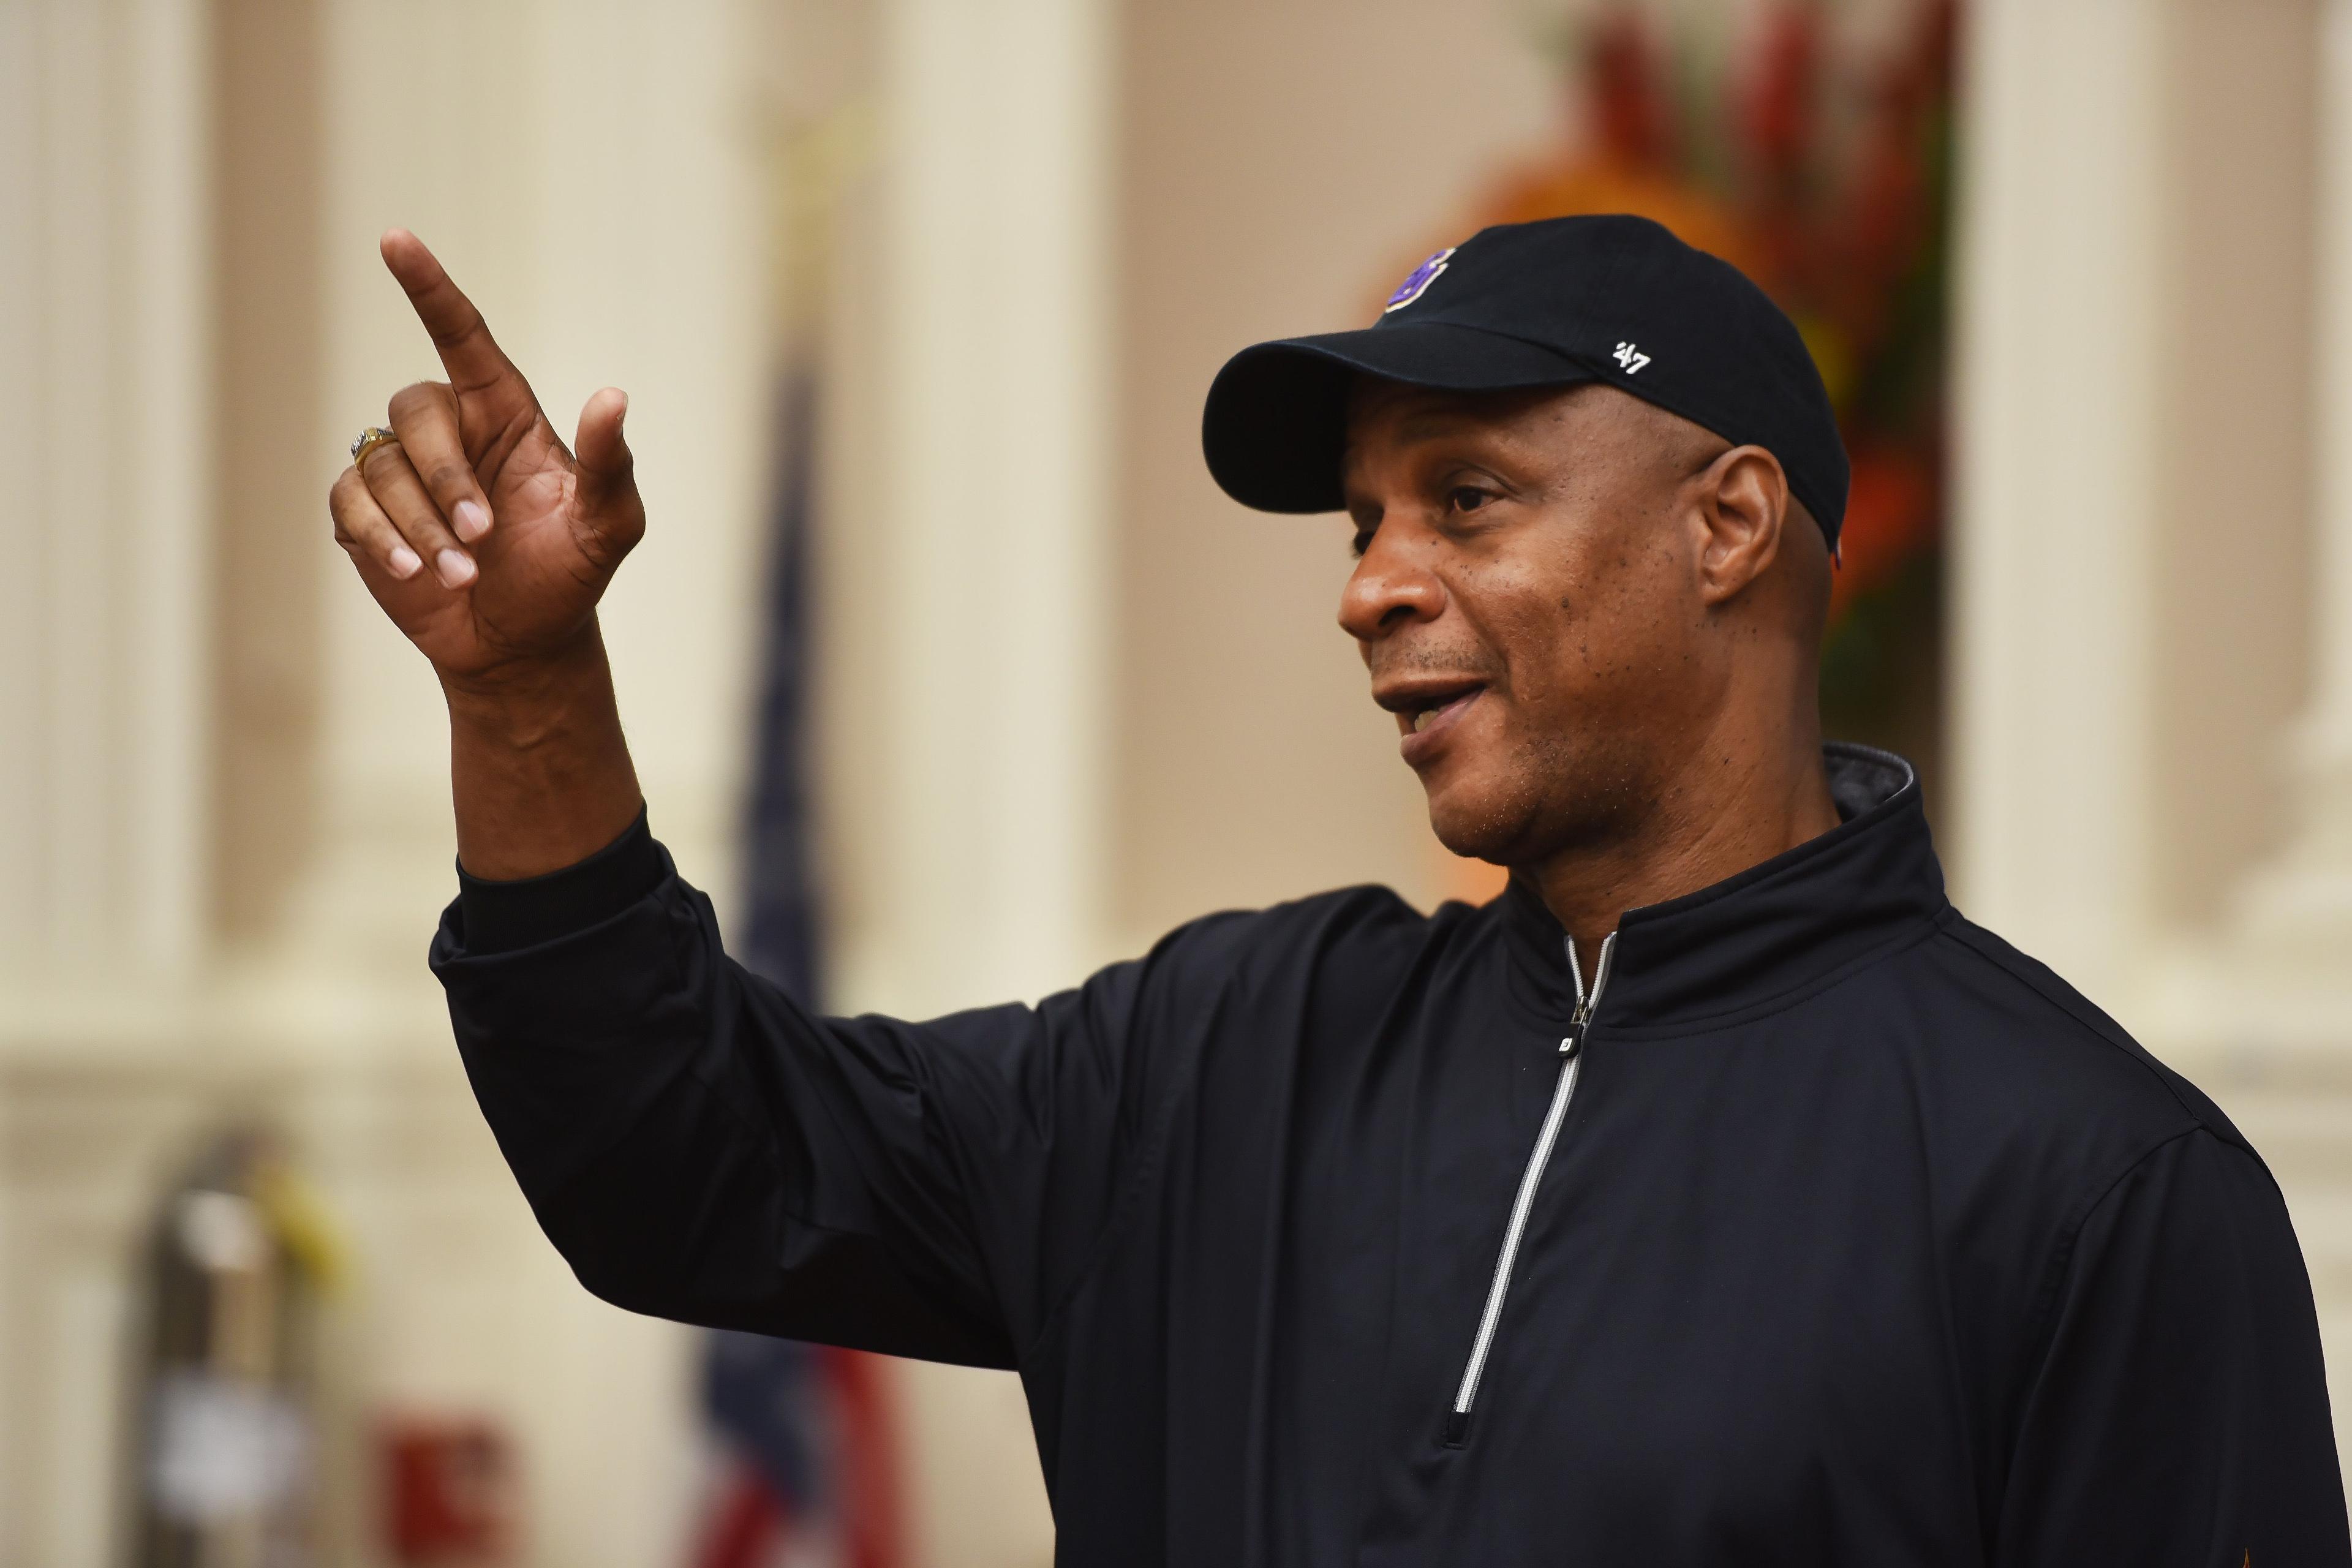 Darryl Strawberry gives a talk about the problems that young kids face today especially drugs, photographed at Fort Lee High School Auditorium in Fort Lee on 10/15/18. Darryl Strawberry 7 / © Mitsu Yasukawa/Northjersey.com